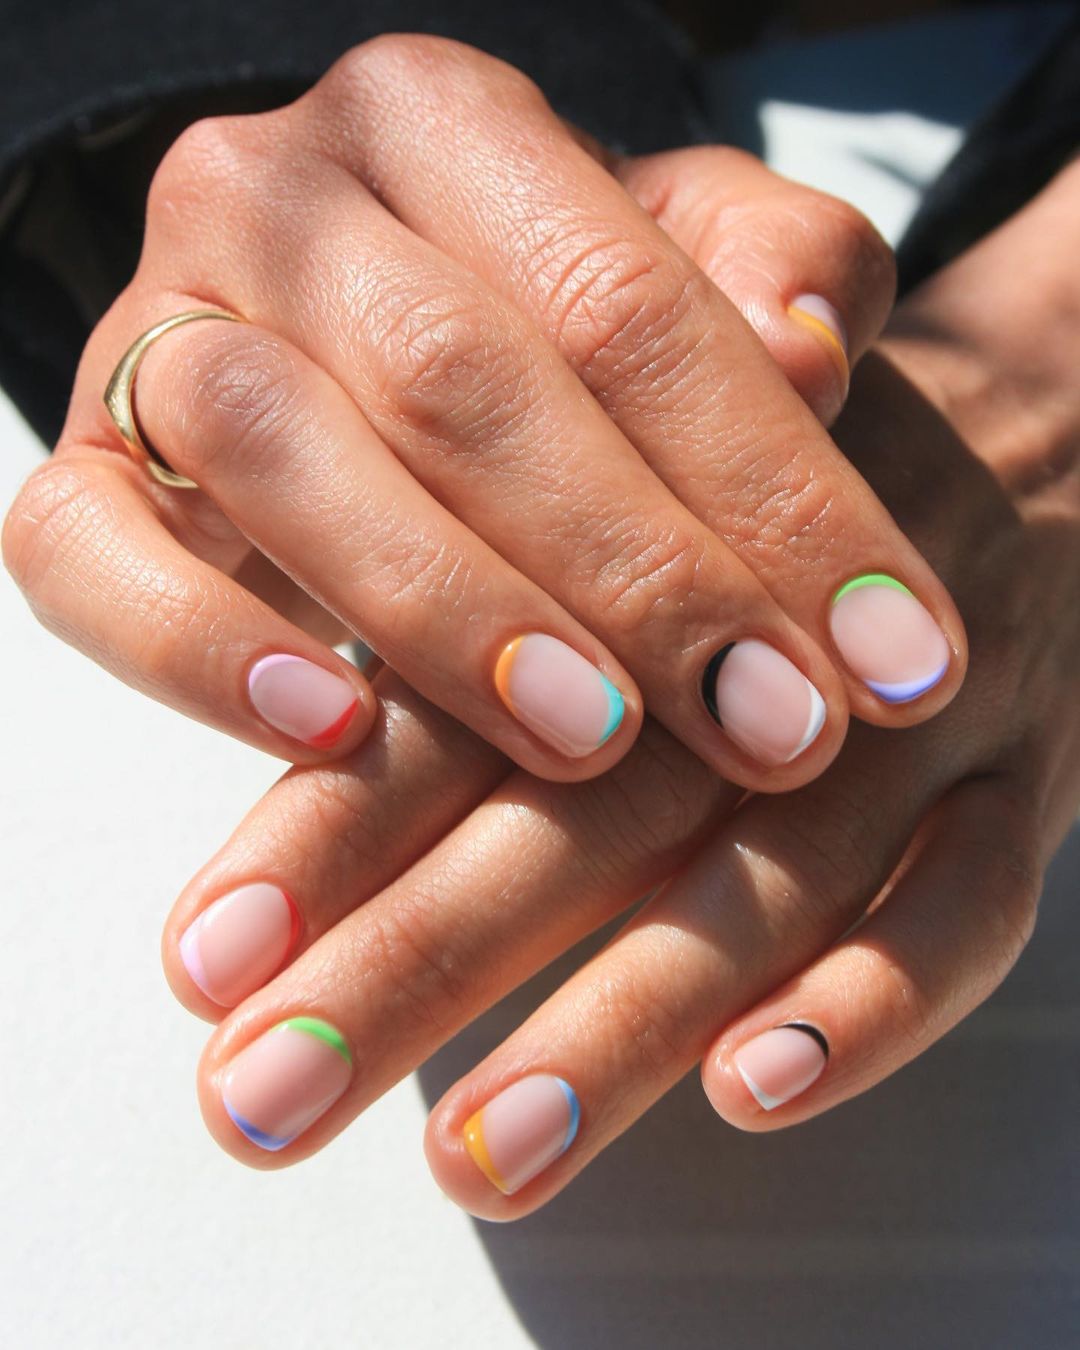 Nail Art Designs and Ideas for Summer - Nail Art for Memorial Day